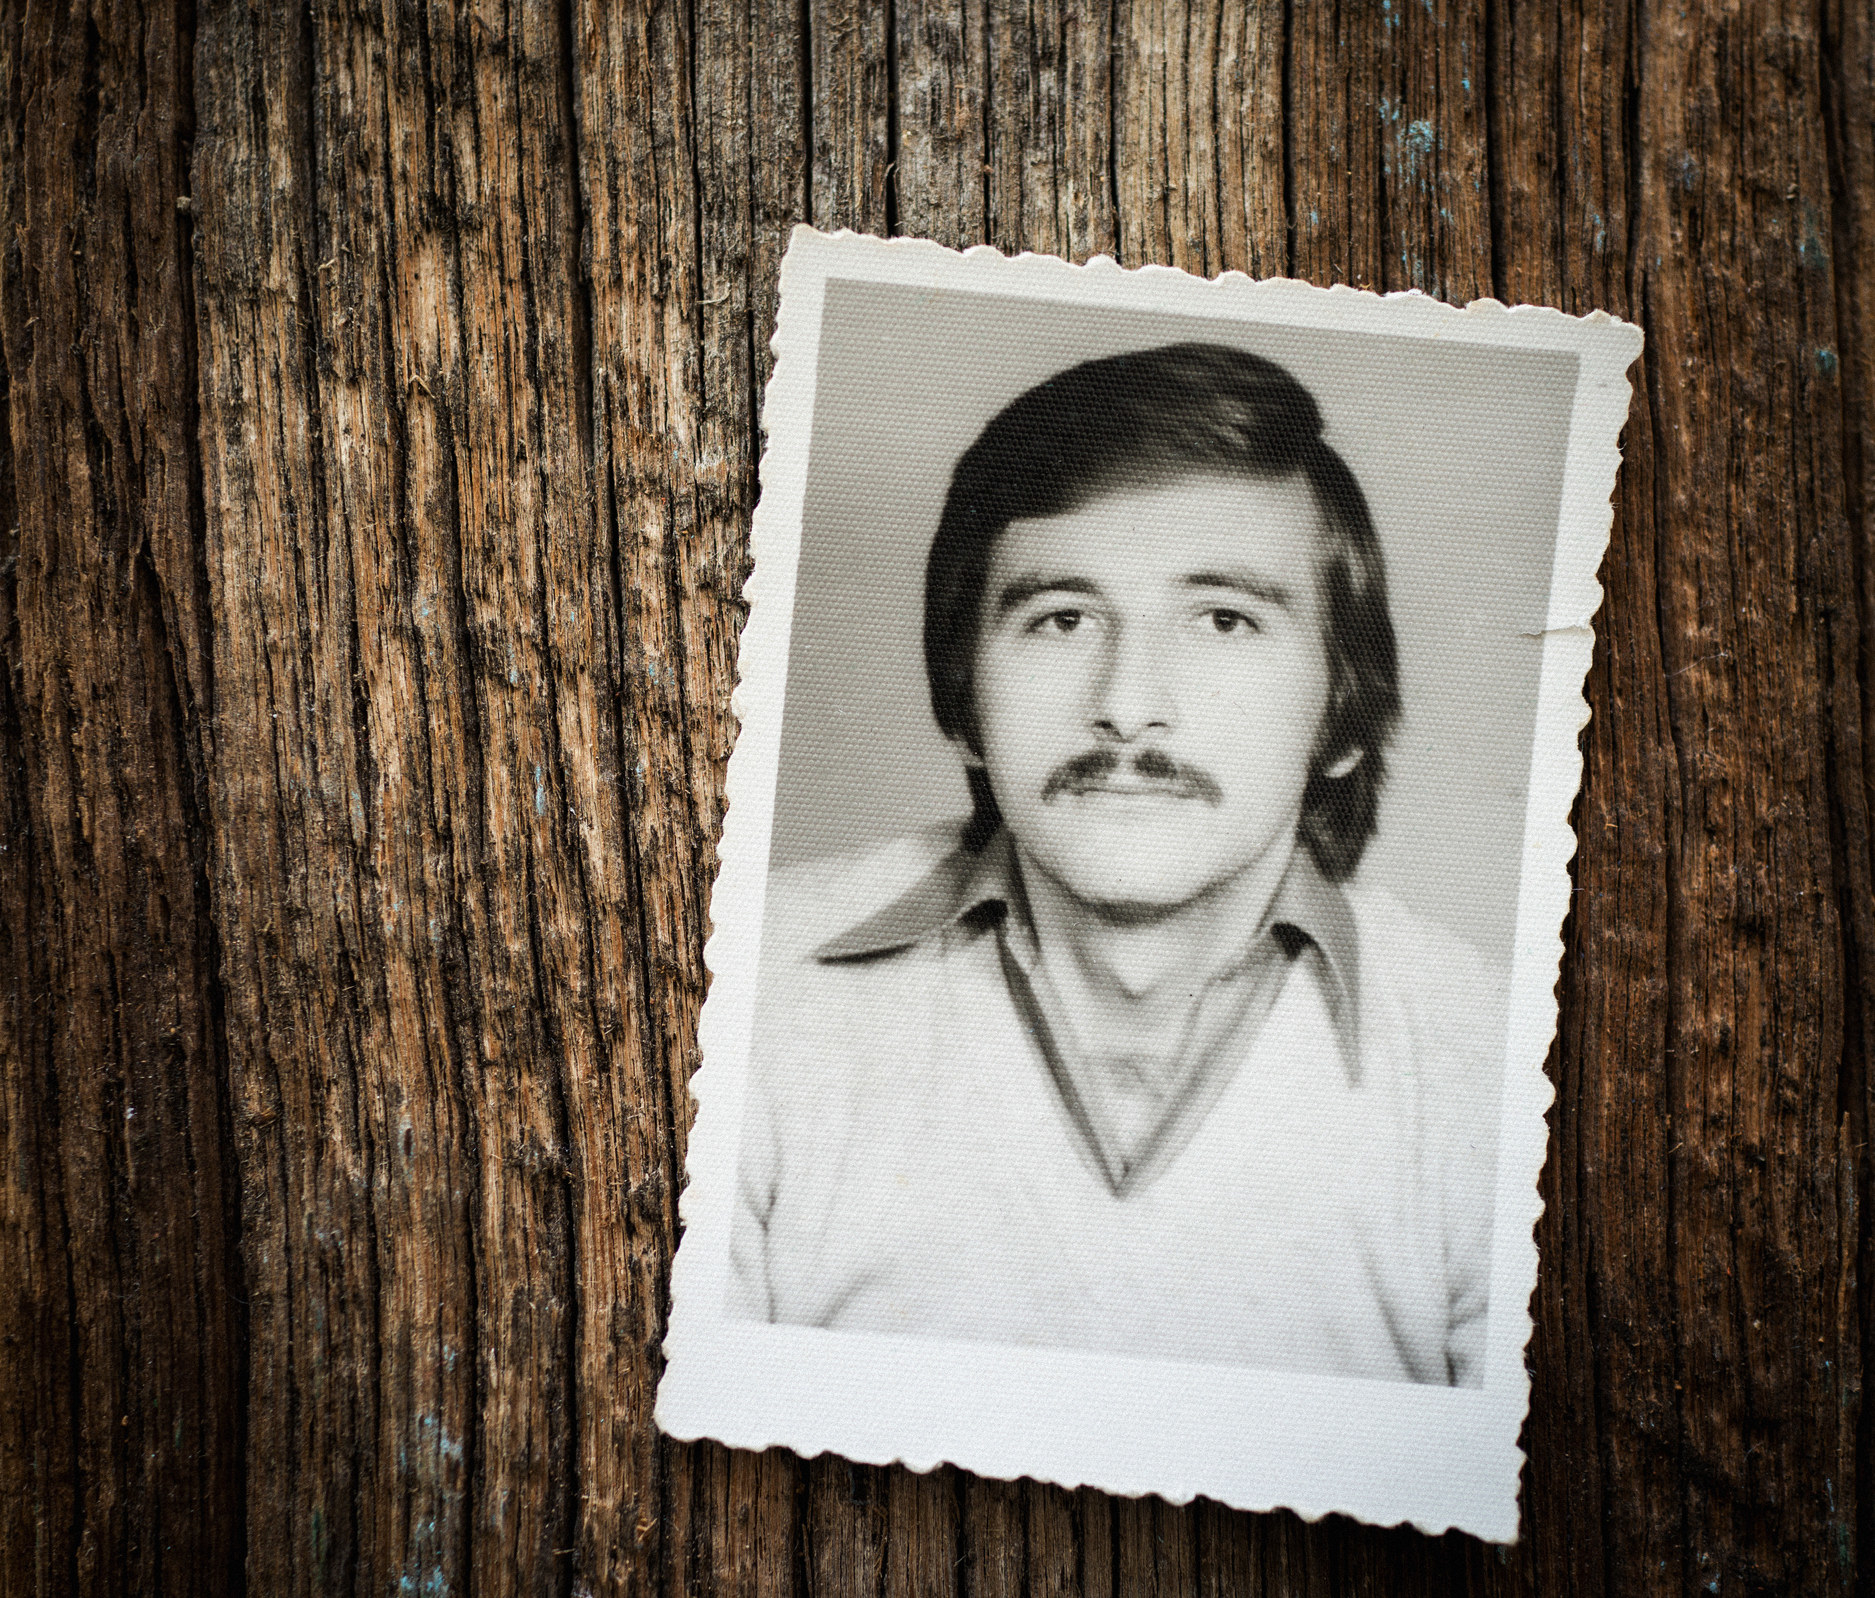 A vintage photo on a piece of wood, showing a man with side-parted hair and mustache wearing a large-collared shirt underneath a v-neck sweater